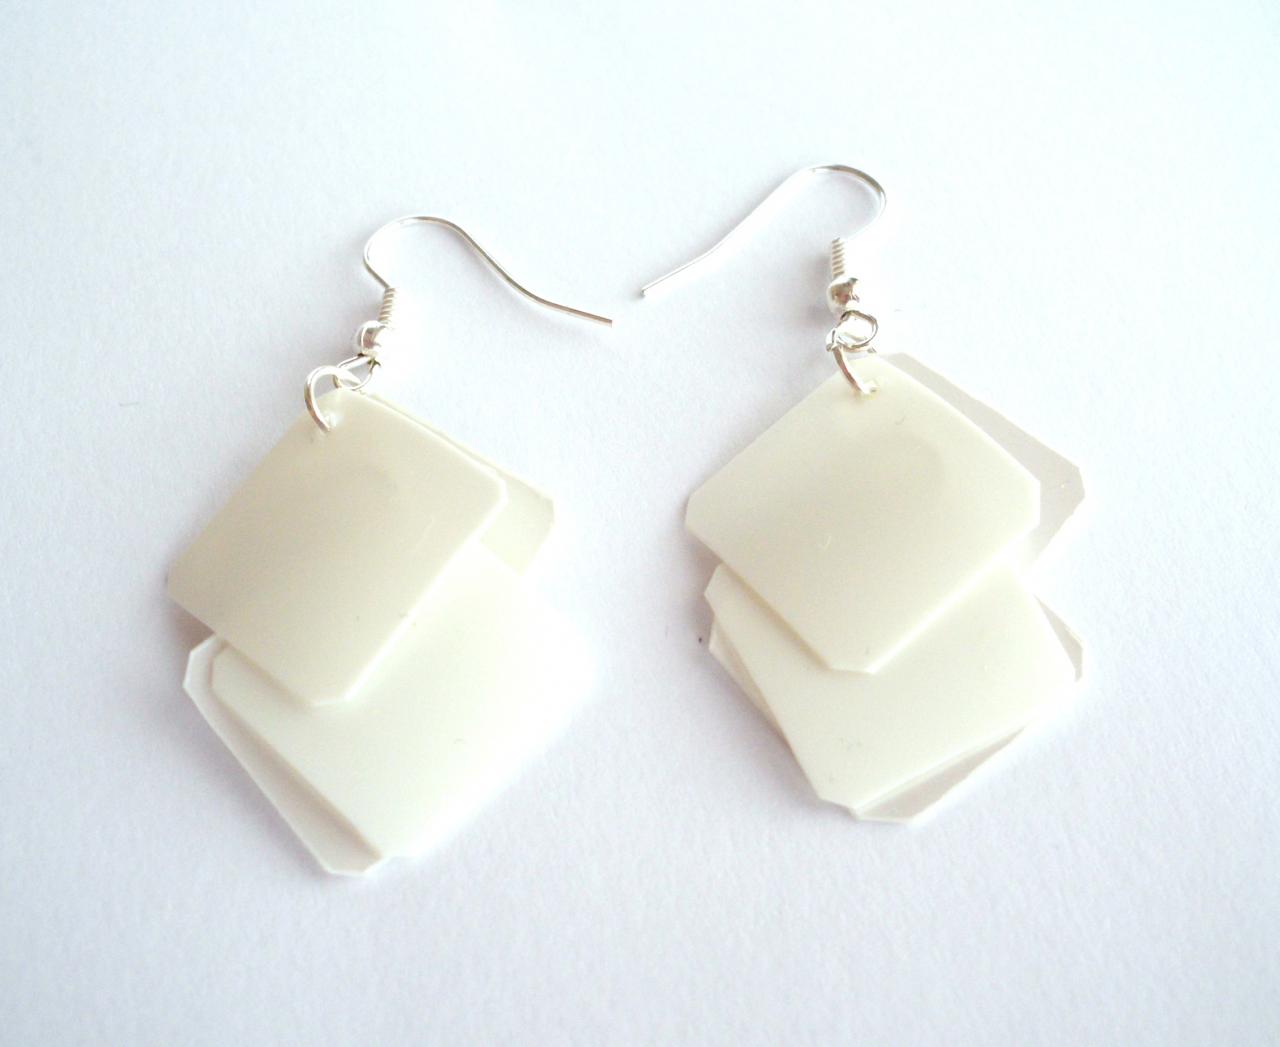 White Earrings Made Of Recycled Plastic Bottle - Geometric, Squares, Eco Friendly, Upcycled Jewelry, Modern, Minimalist